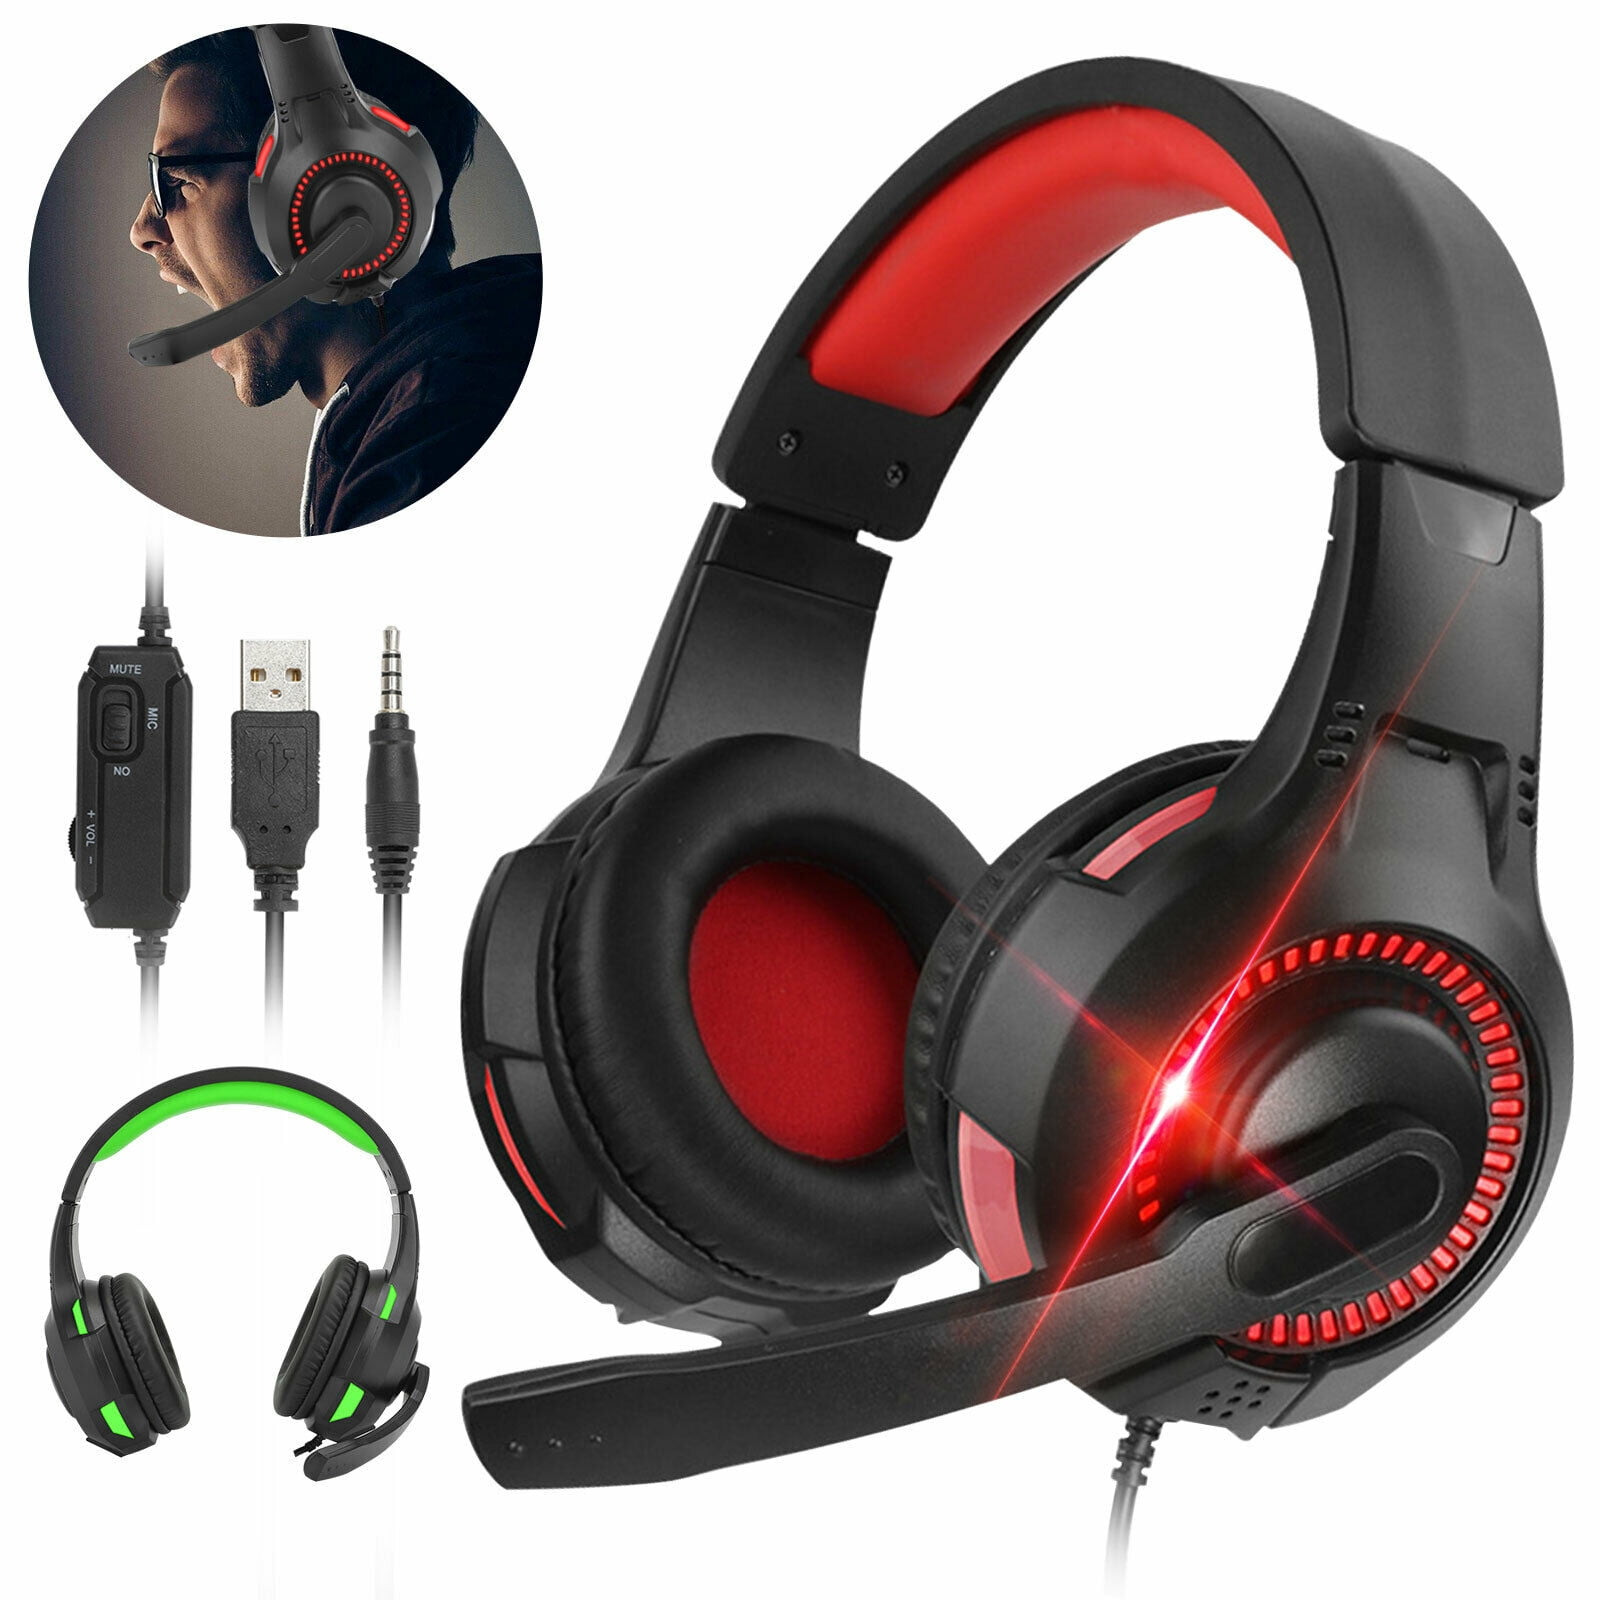 Xbox One PS4 Gaming Headset Headphones with Mic and LED Light for Laptop Computer,Stereo Gamer Headphones,3.5mm Wired Noise Isolation Gaming Headphones Red 